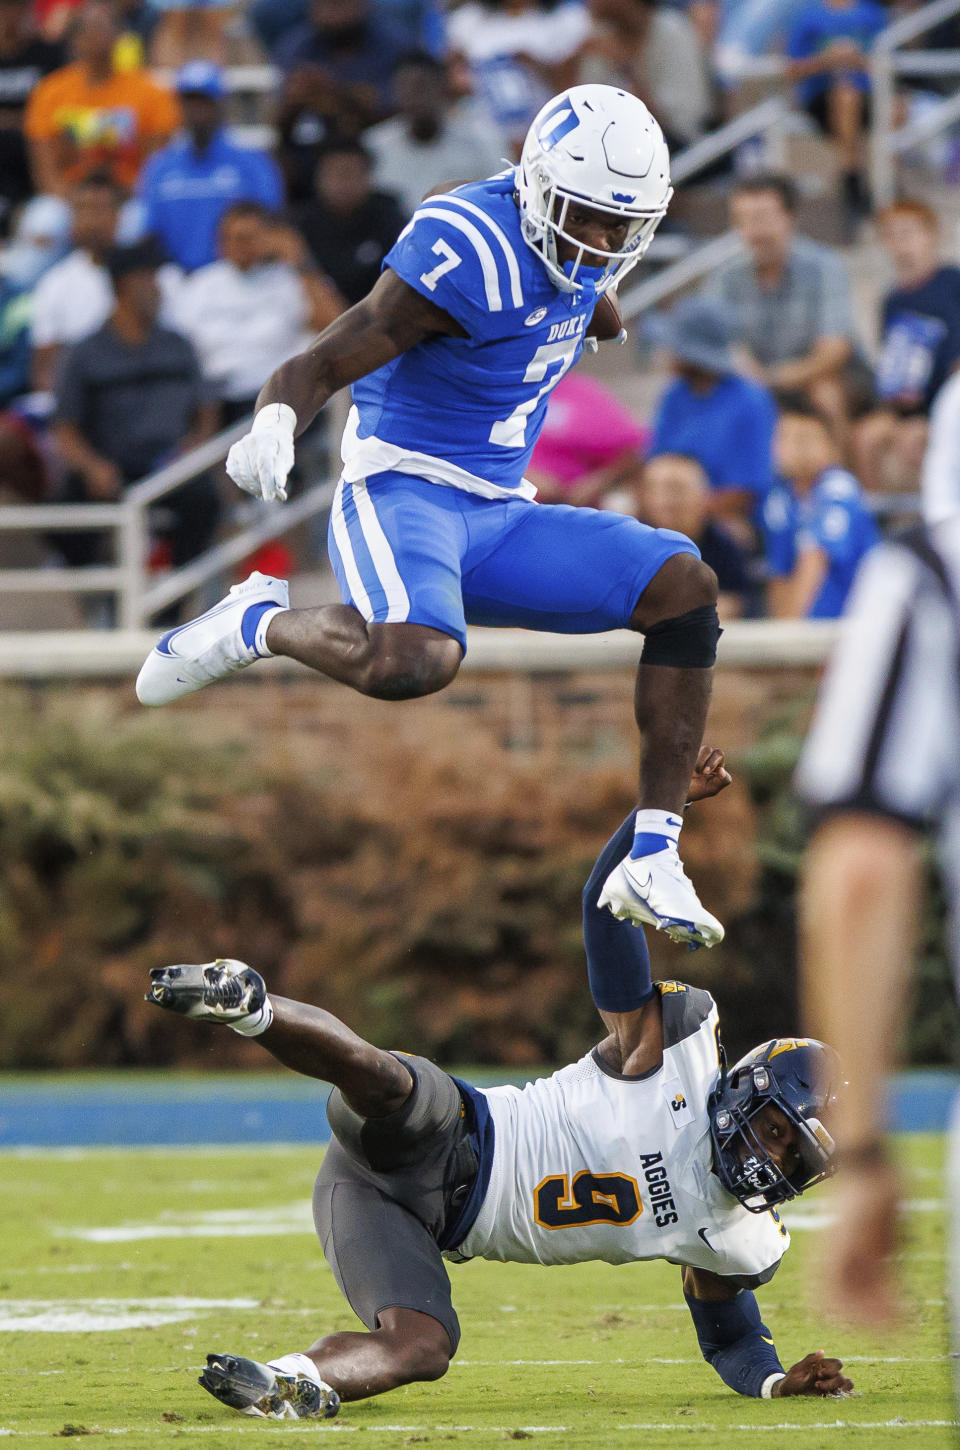 Duke's Jordan Waters (7) hurdles over North Carolina A&T's Janaz Sumpter (7) during the first half of an NCAA college football game in Durham, N.C., Saturday, Sept. 17, 2022. (AP Photo/Ben McKeown)